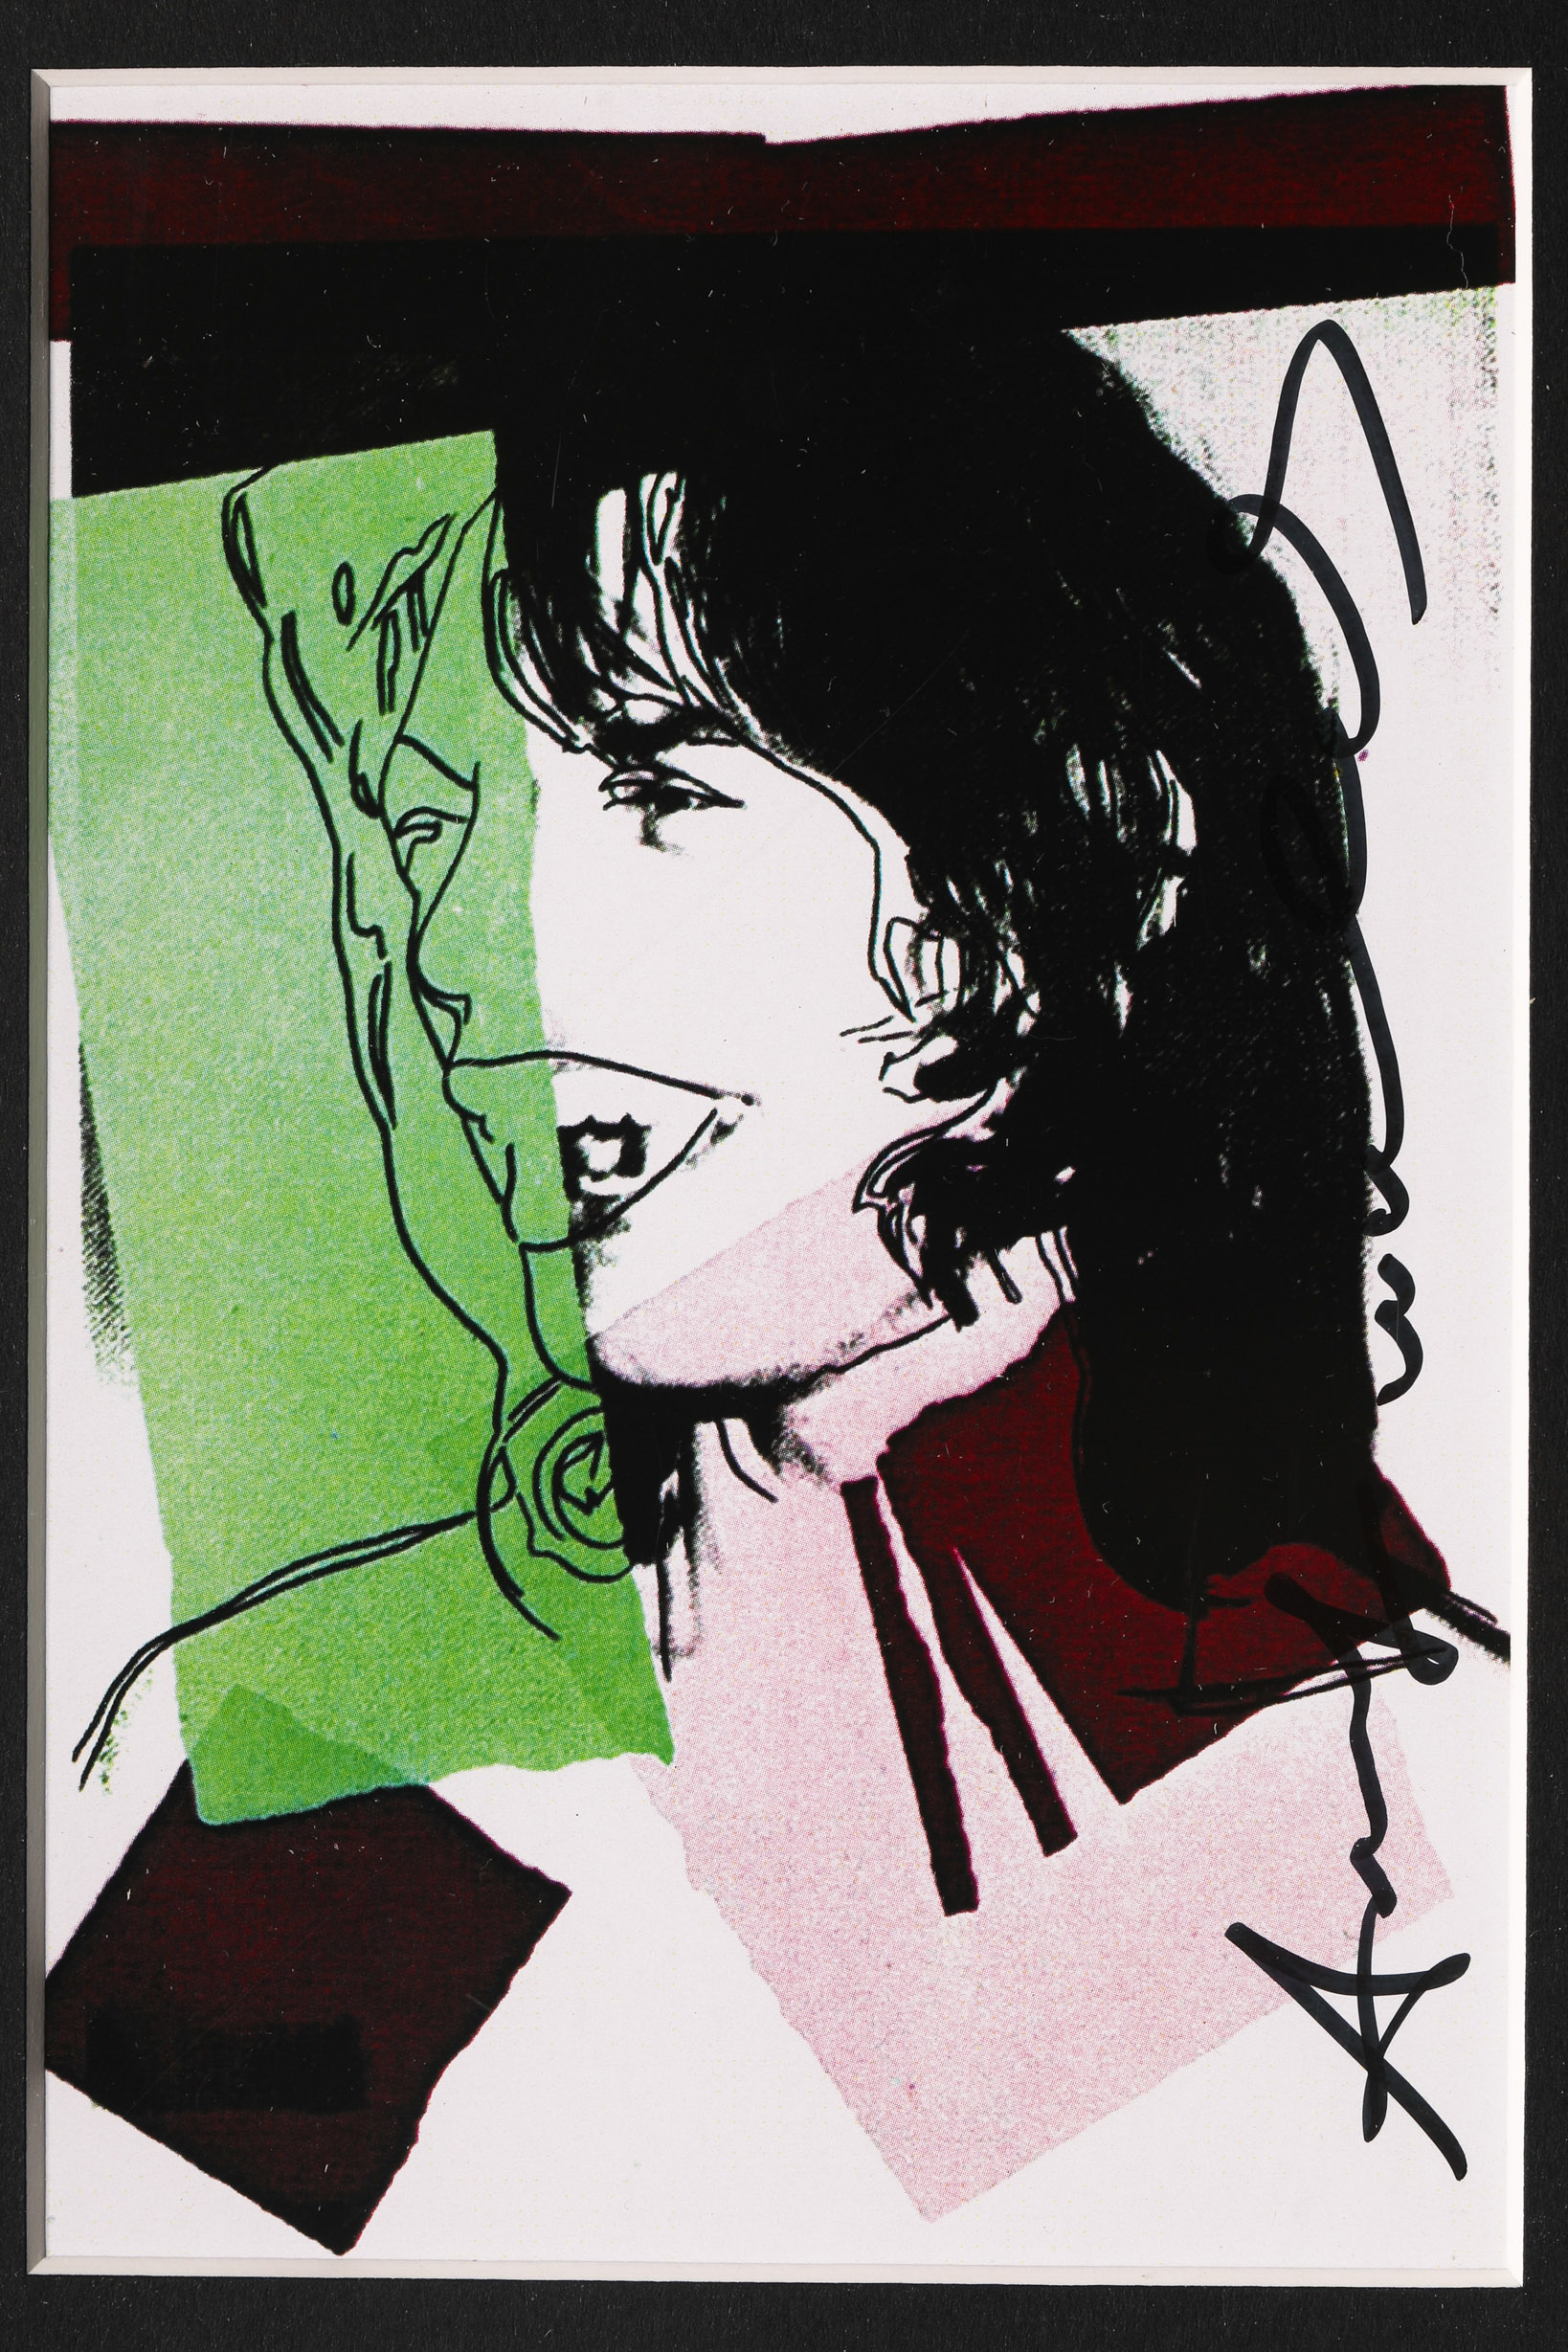 Andy Warhol, Mini Portfolio Mick Jagger with 10 Prints, 1975, signed - Image 5 of 16